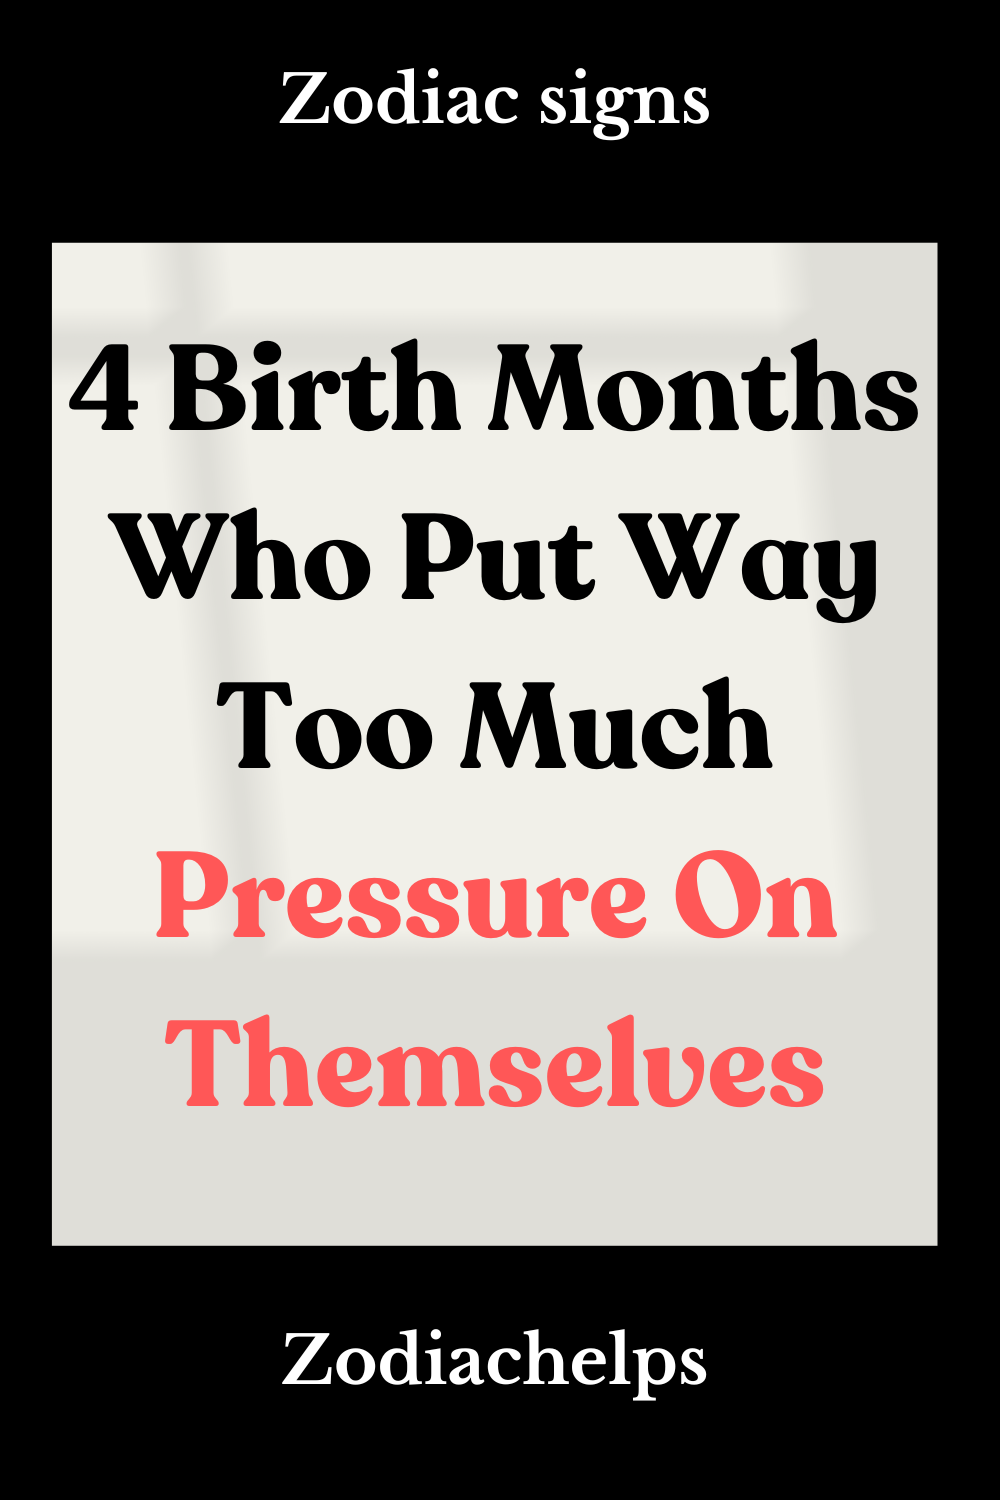 4 Birth Months Who Put Way Too Much Pressure On Themselves